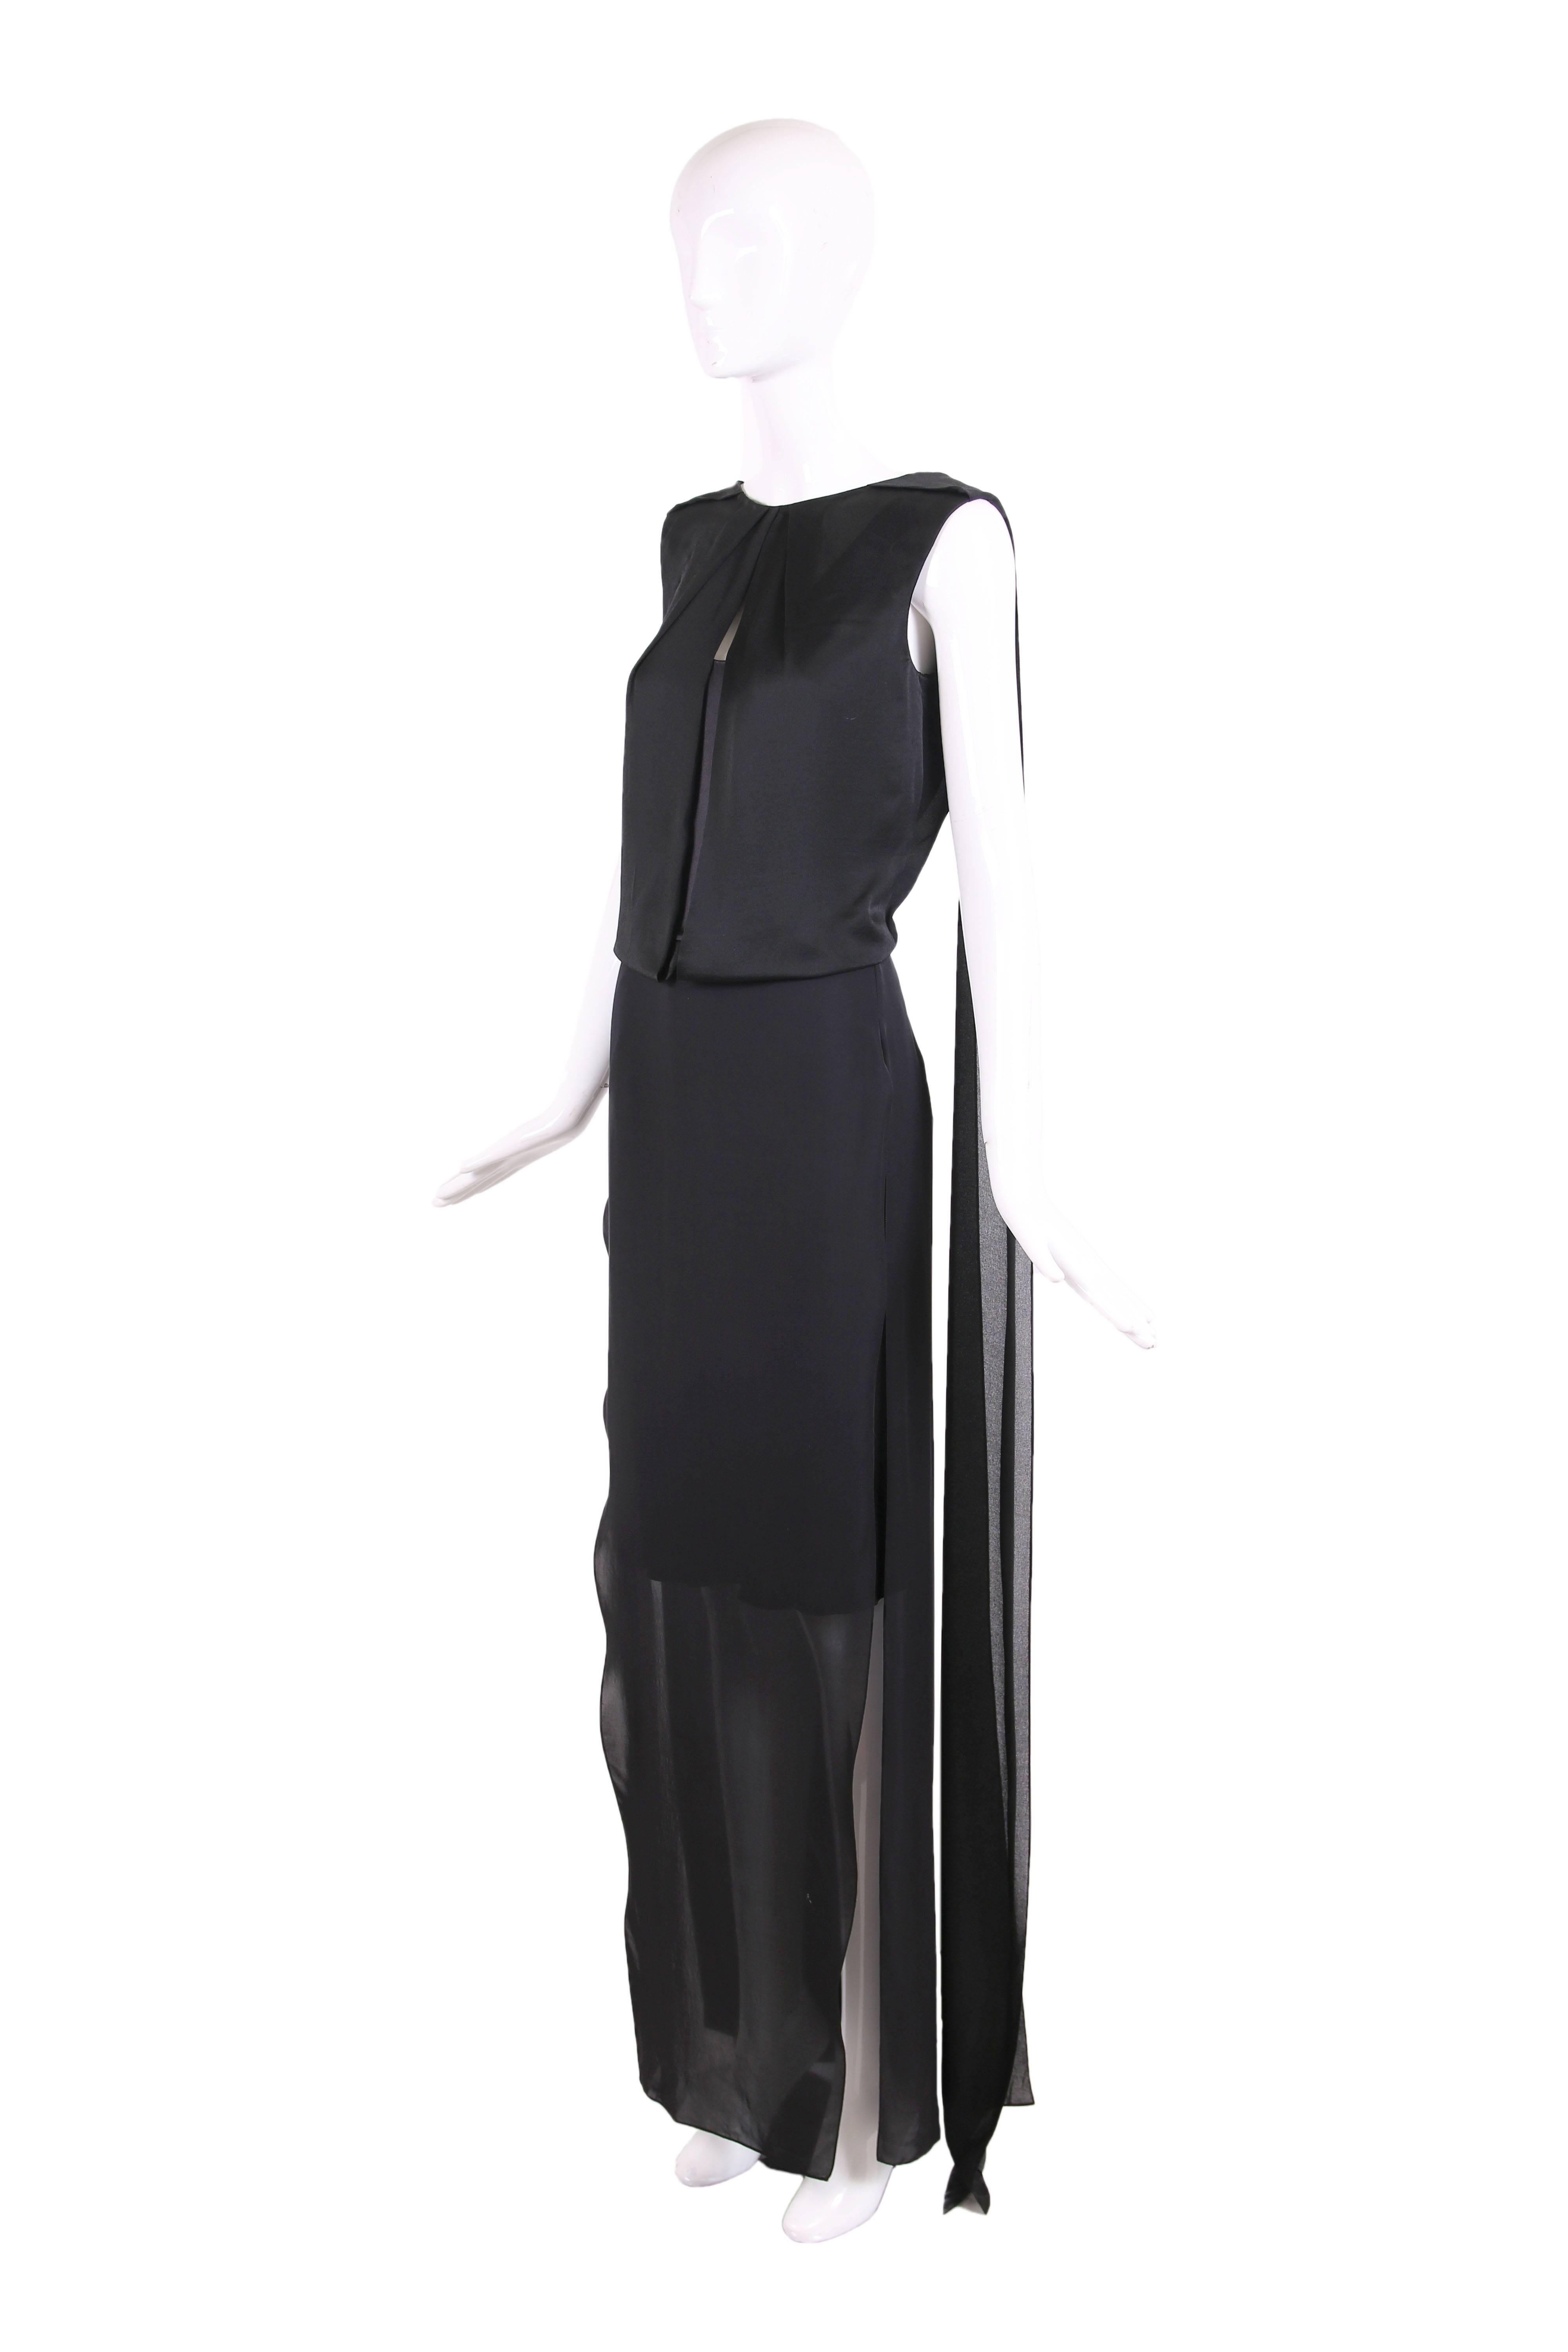 Tom Ford black silk gown which features a sheath overlay and scarf attachments at the back. At the interior is a black silk charmeuse mini dress with a deep scoop neckline at the front and deep V-neckline at the back. On top of that is a panel of